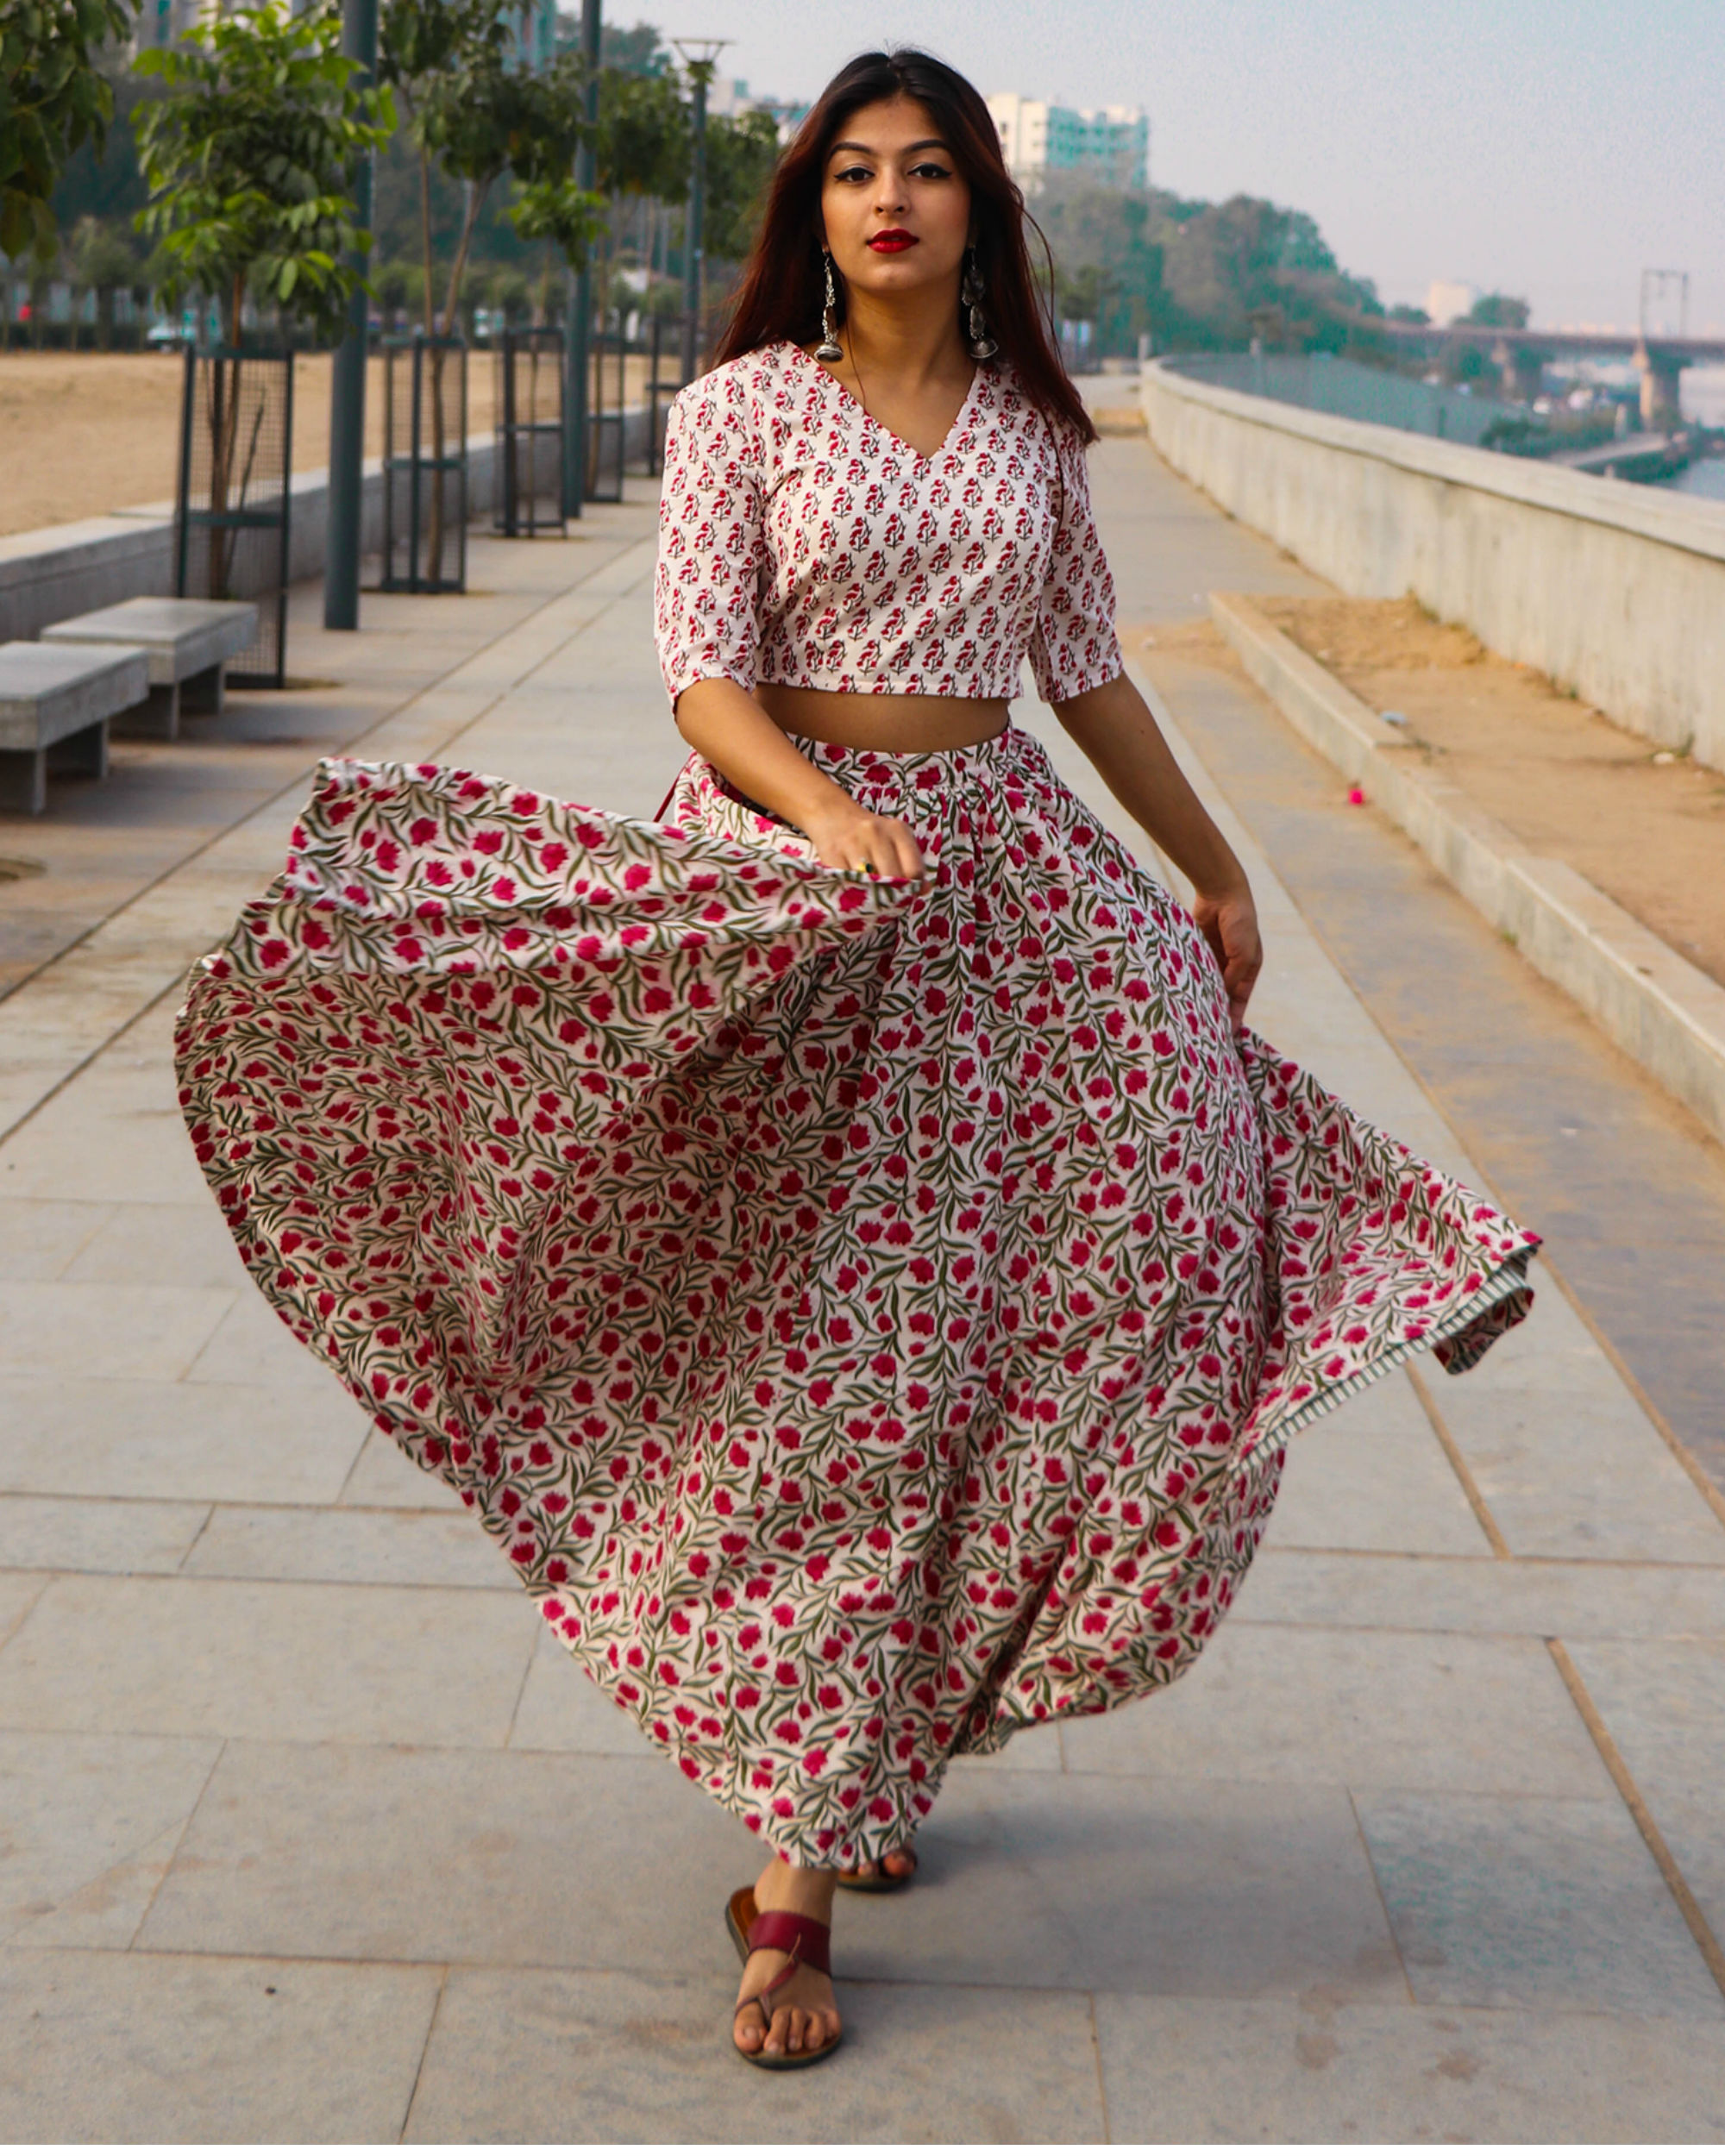 Photo of cotton printed lehenga with roses on it